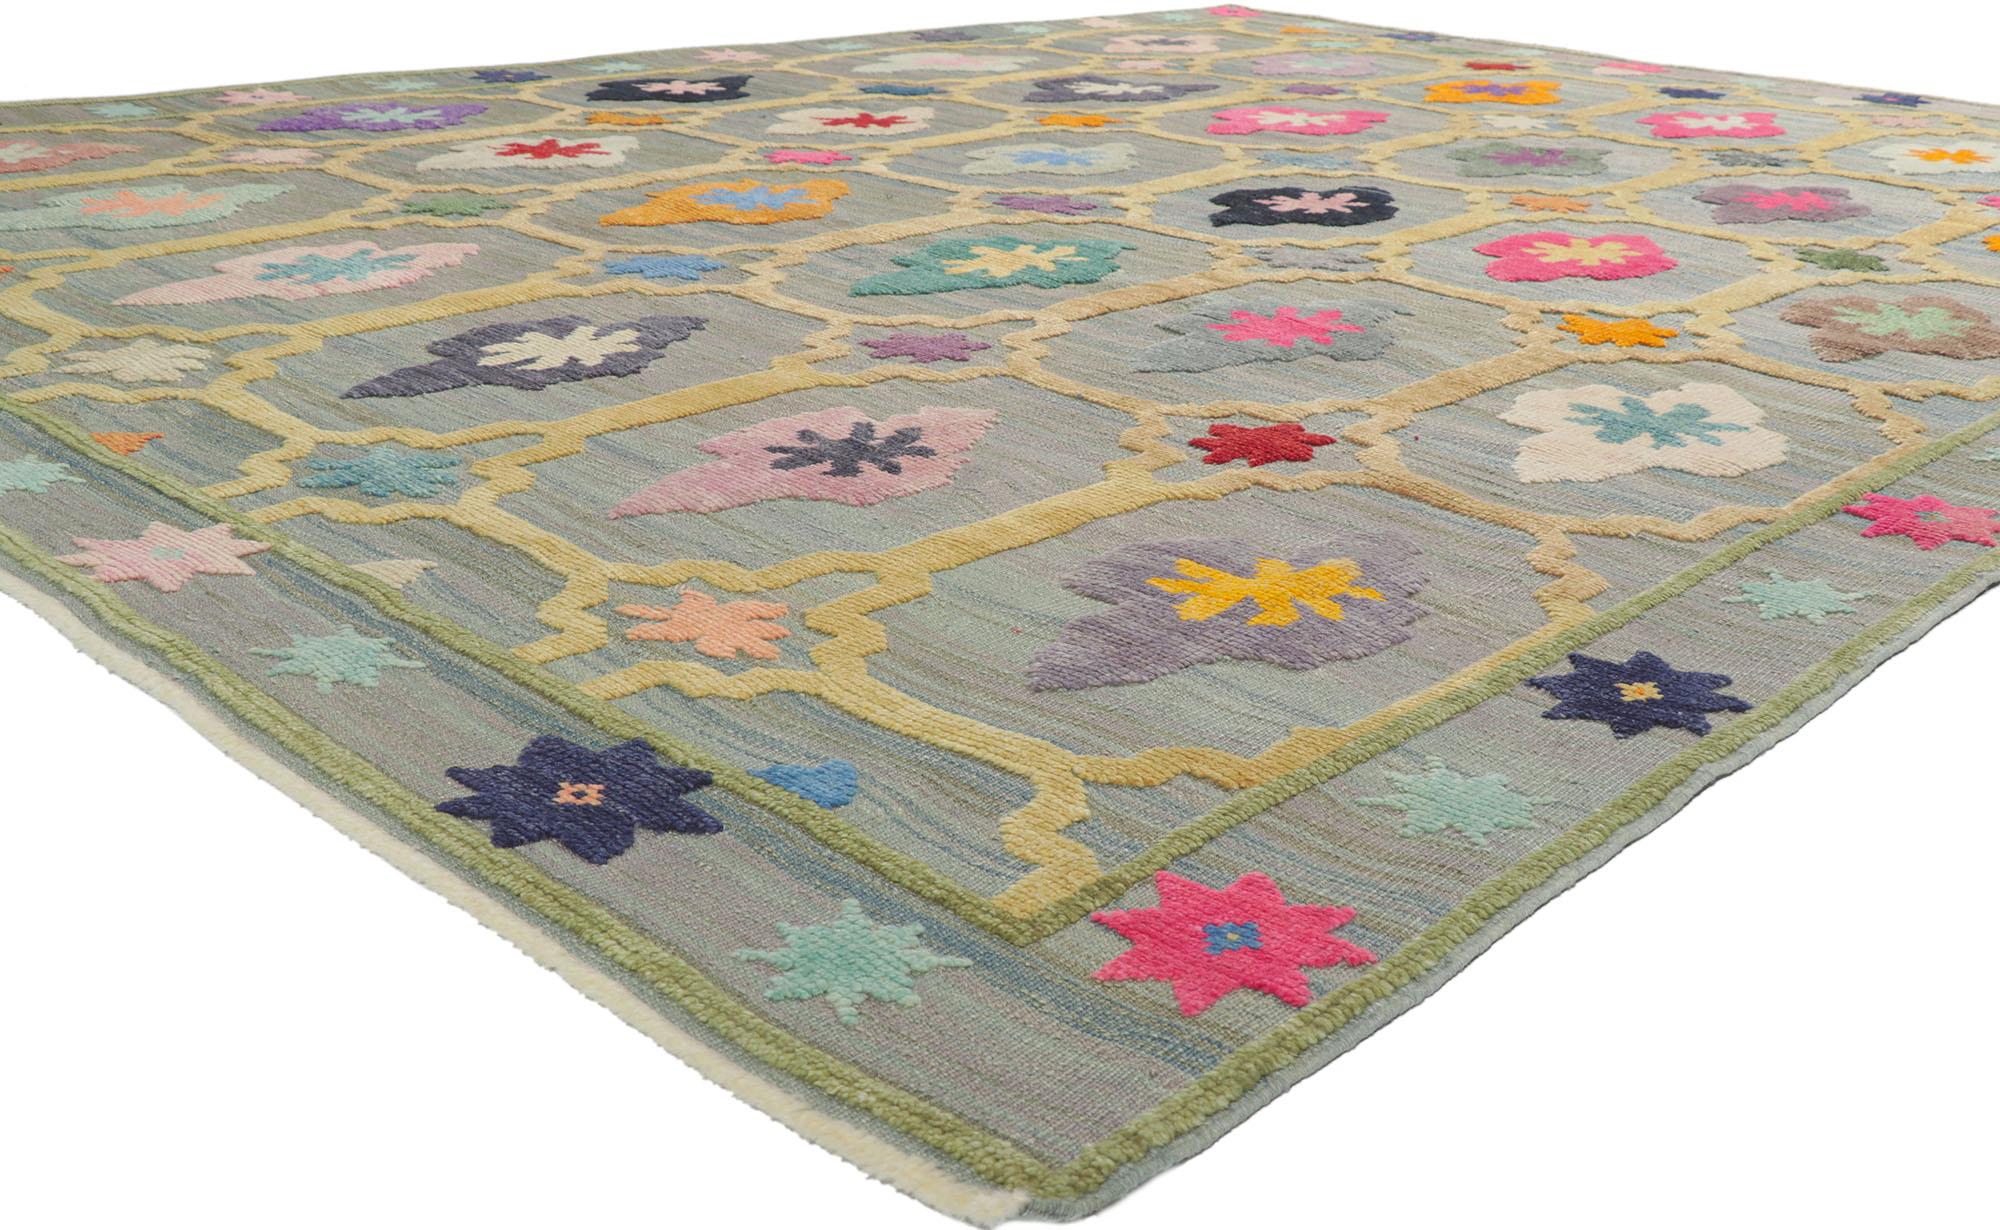 53783 new Turkish Kilim geometric high low rug 10'02 x 13'10. Full of tiny details and a bold compartmental design combined with vibrant colors, this hand-woven wool Turkish Kilim geometric high low rug is a captivating vision of woven beauty. The